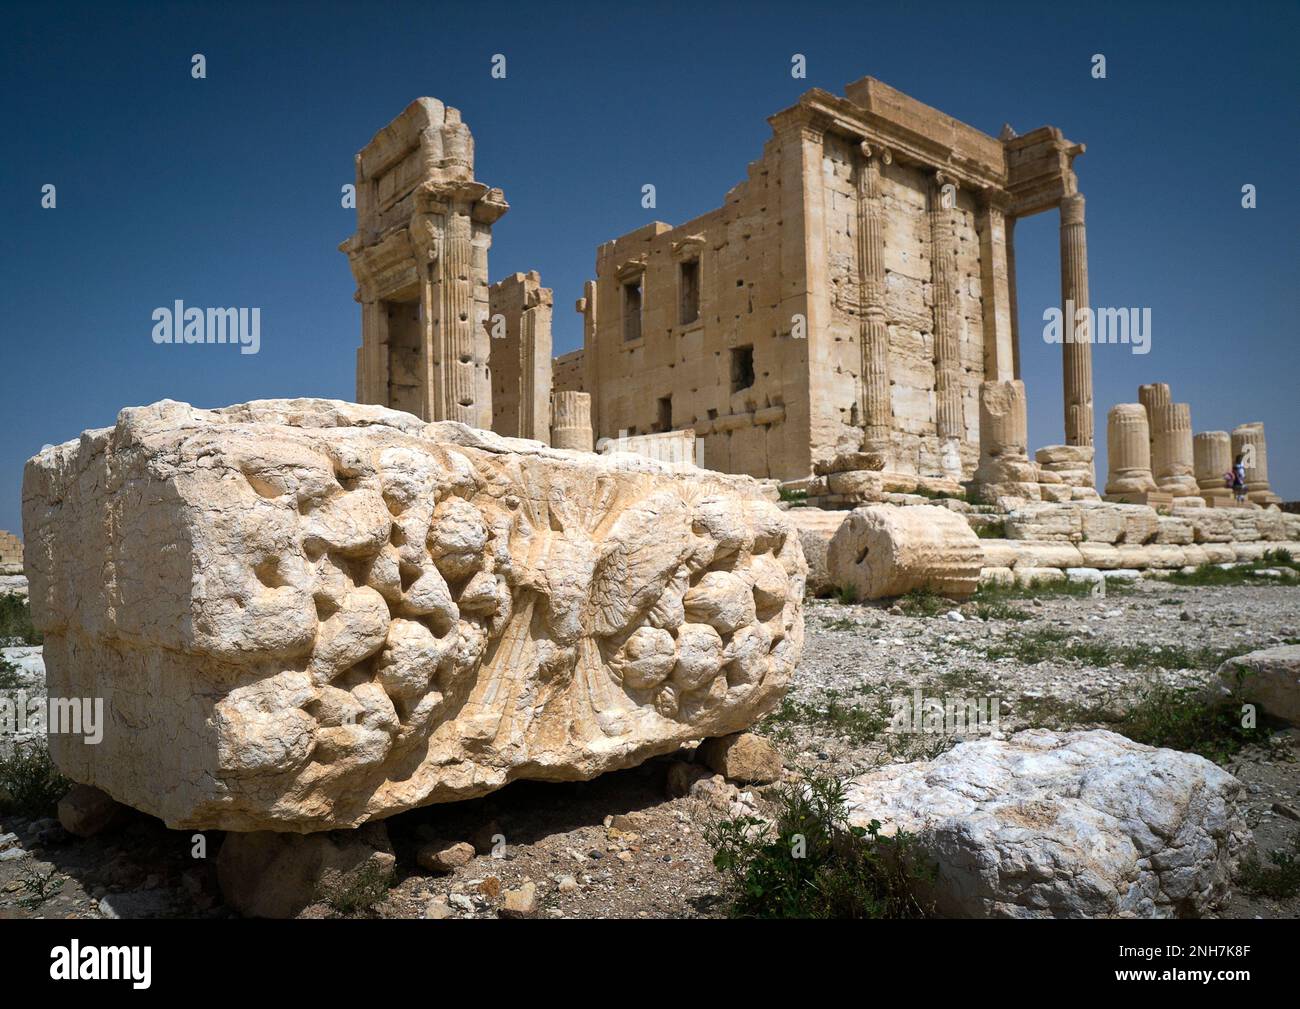 Bel Temple, destroyed in 2015, at Palmyra ancient city ruins, Homs Governorate, Syria Stock Photo